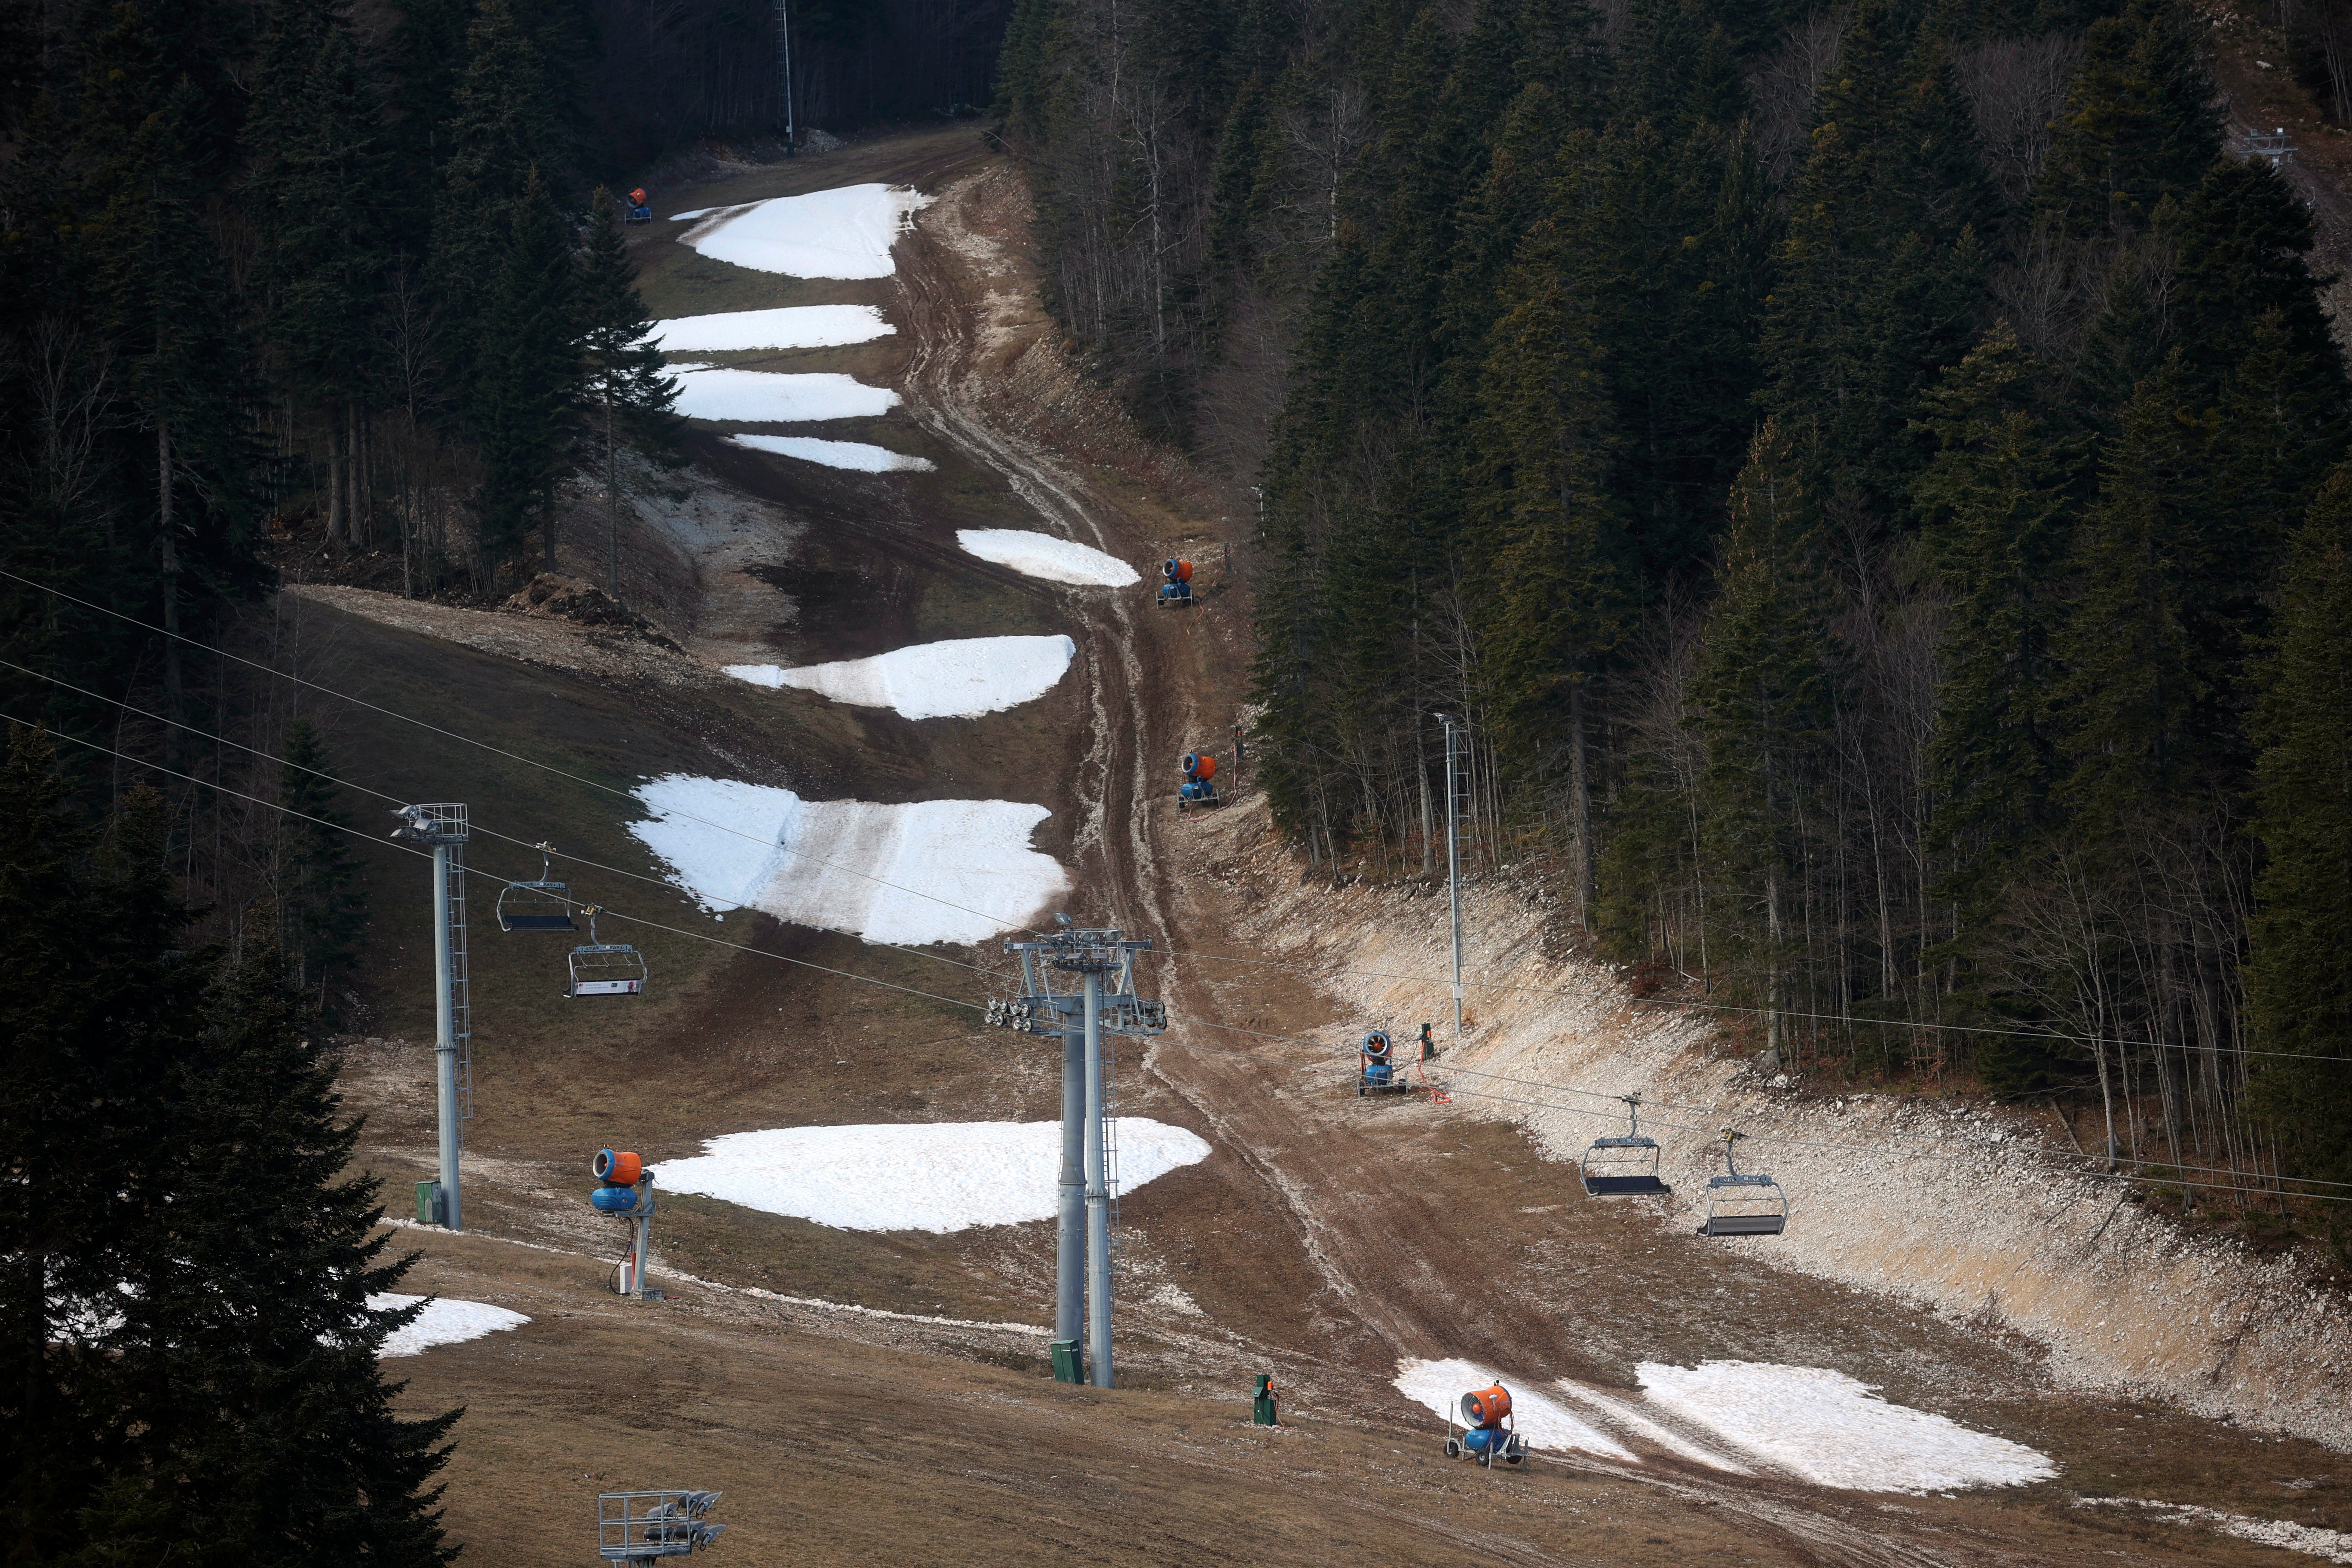 The ski track with only a few patches of snow on Bjelasnica mountain near Sarajevo, Bosnia, Wednesday, January 4, 2023